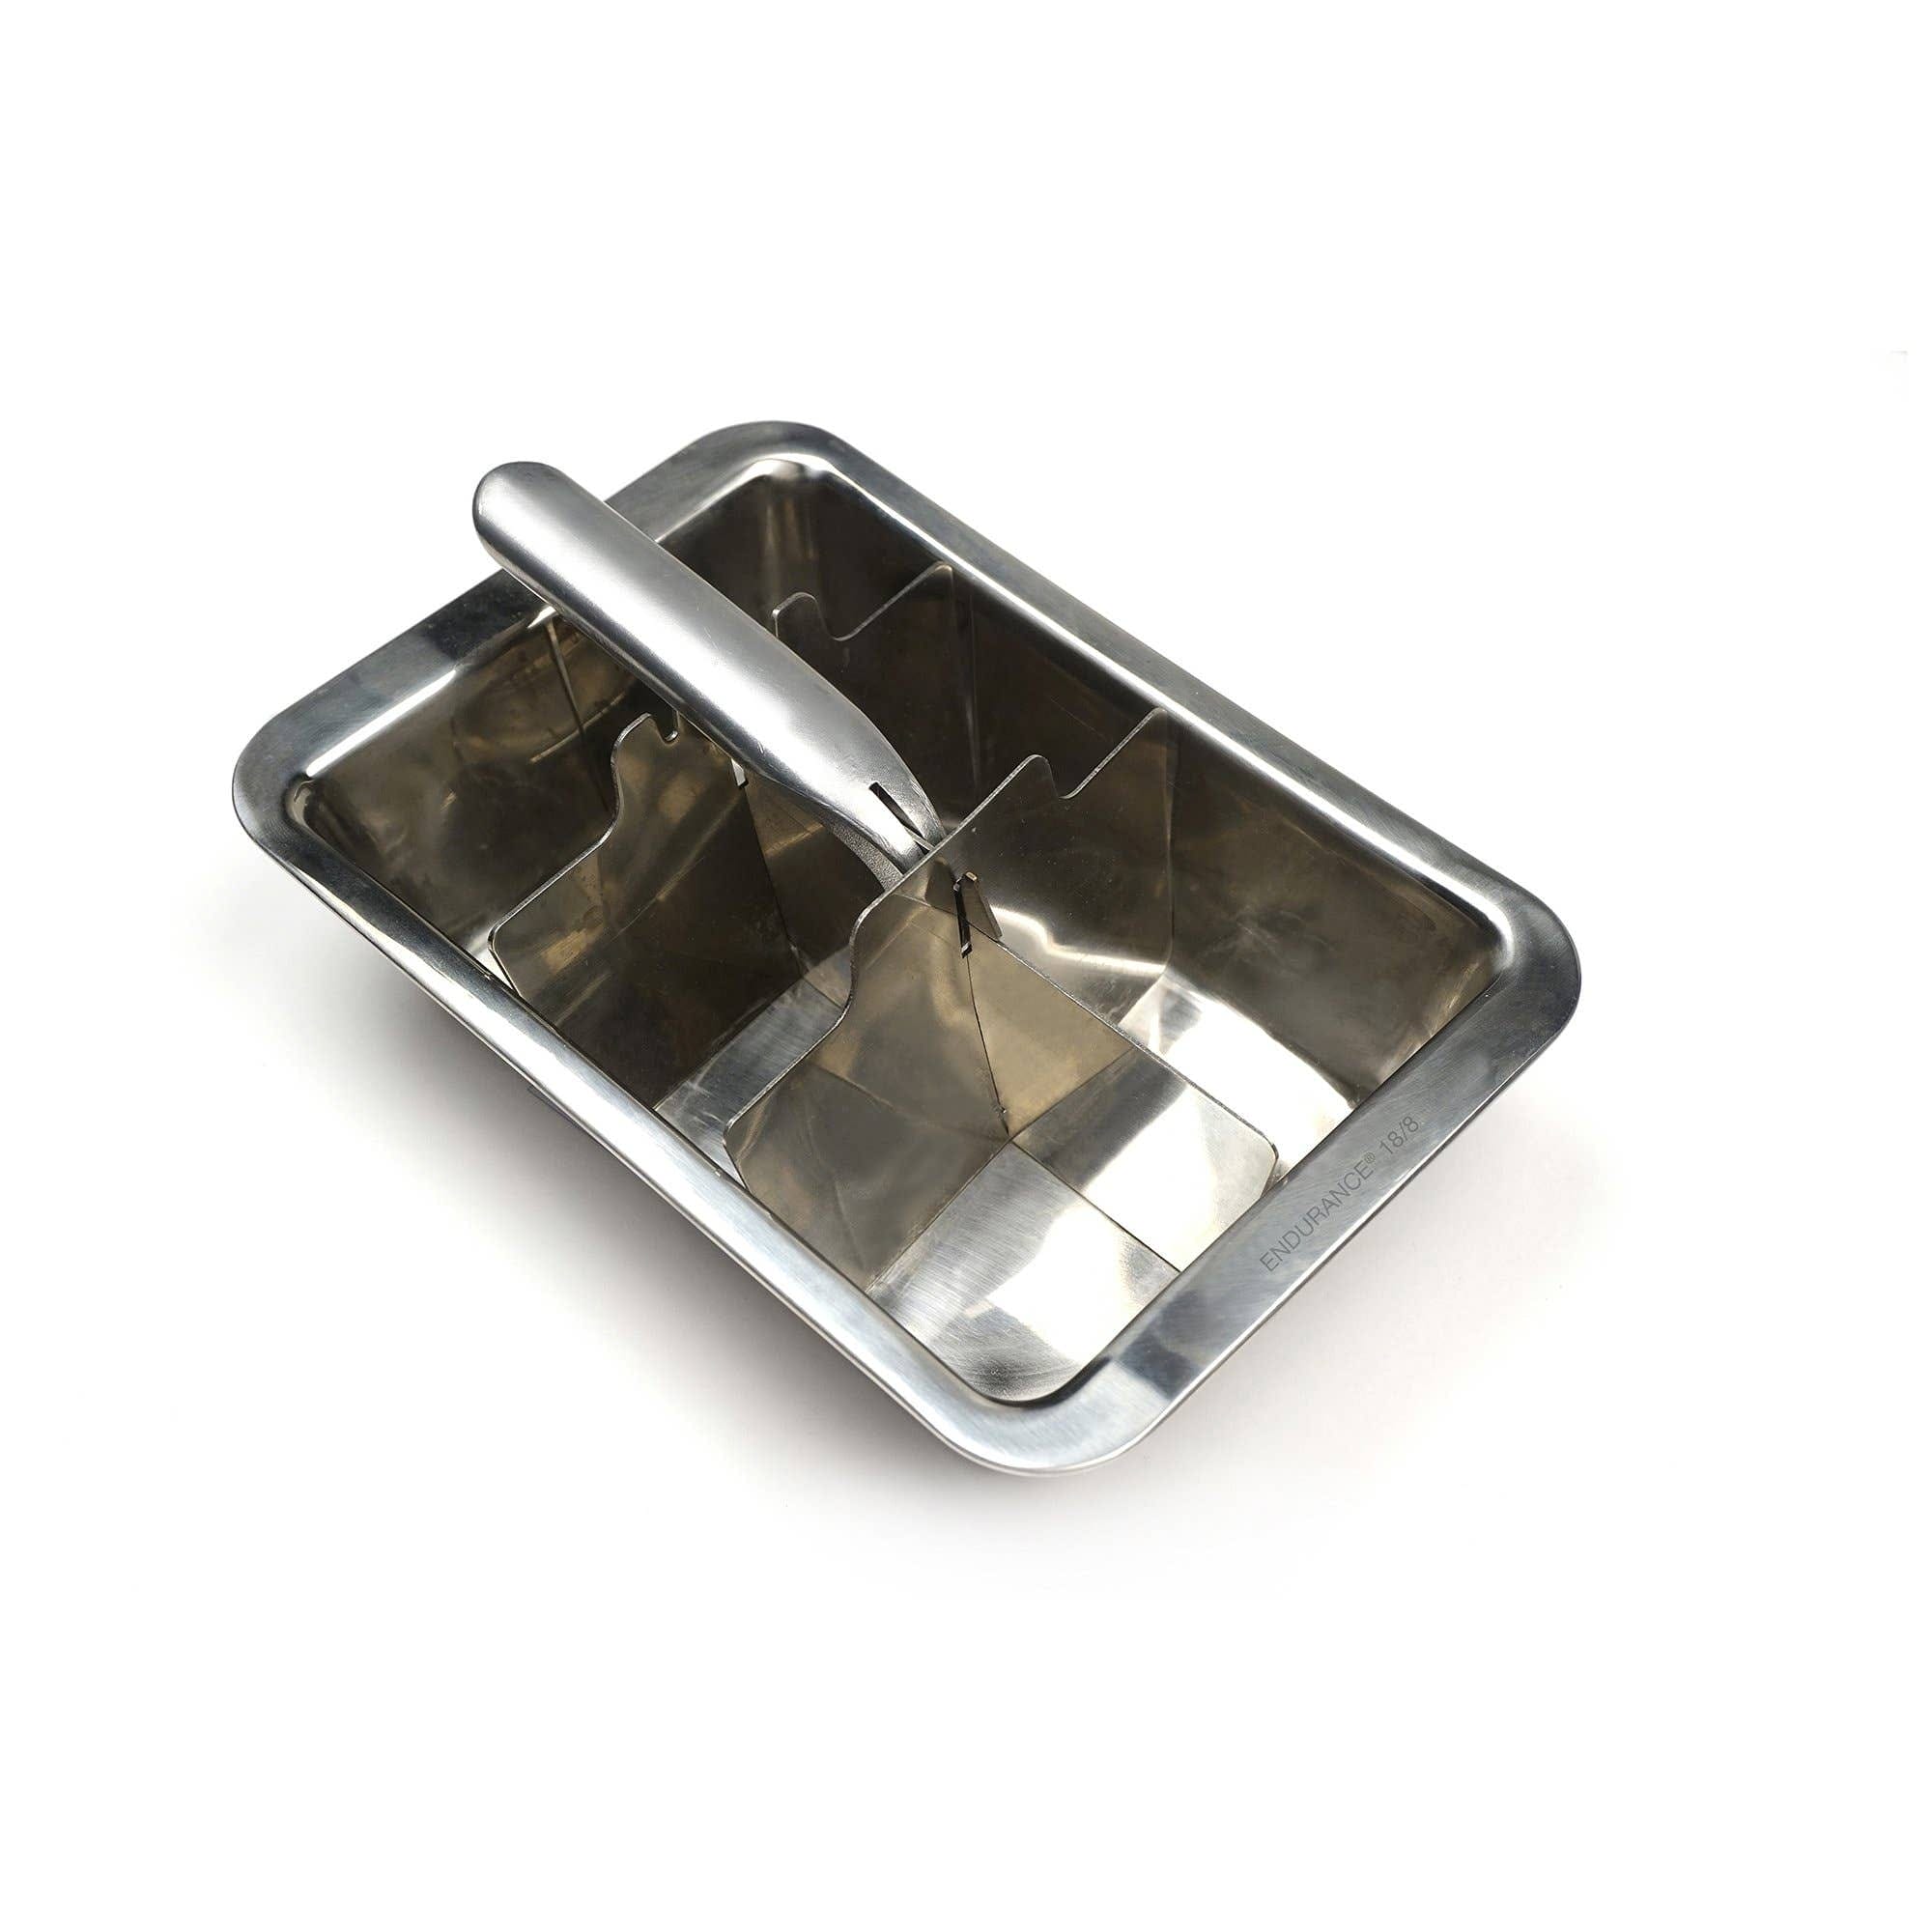 Onyx Stainless Steel Ice Cube Tray